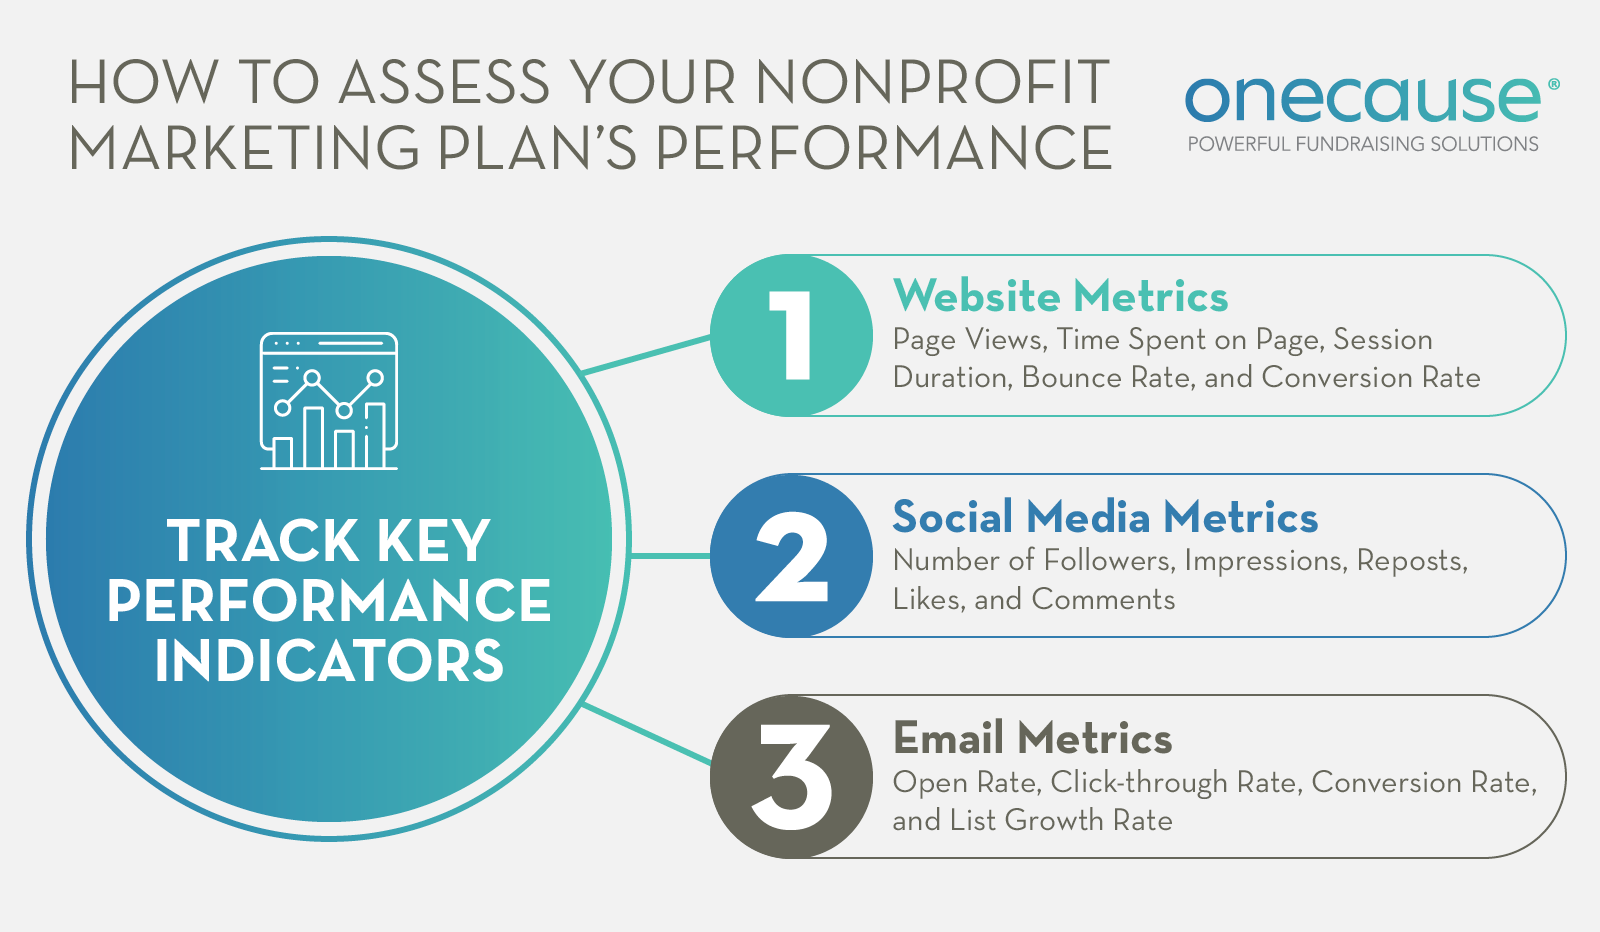 Your nonprofit marketing plan should include the key performance indicators you’ll track to measure success.